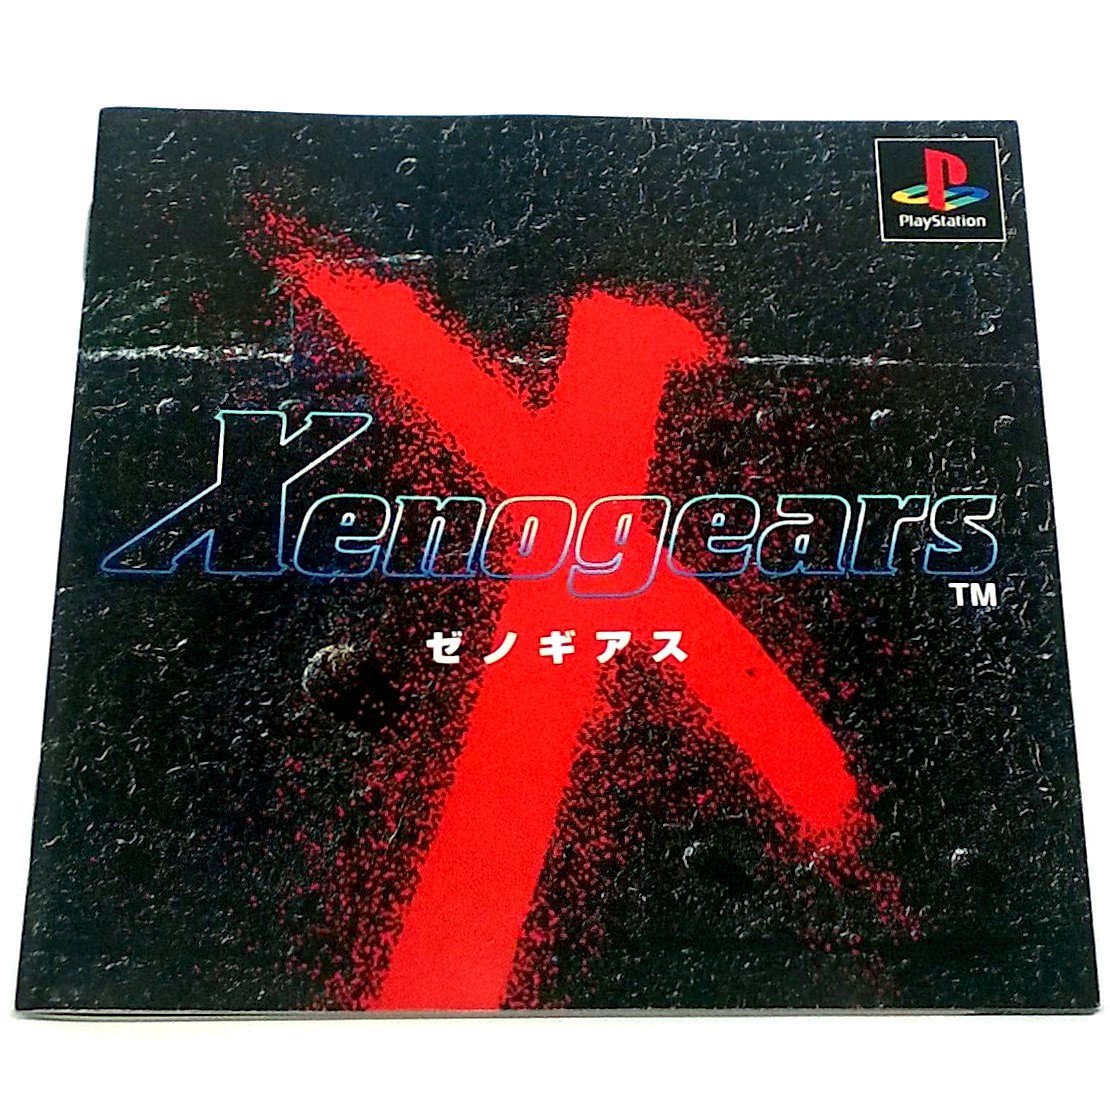 Xenogears for PlayStation (Import) - Front of manual